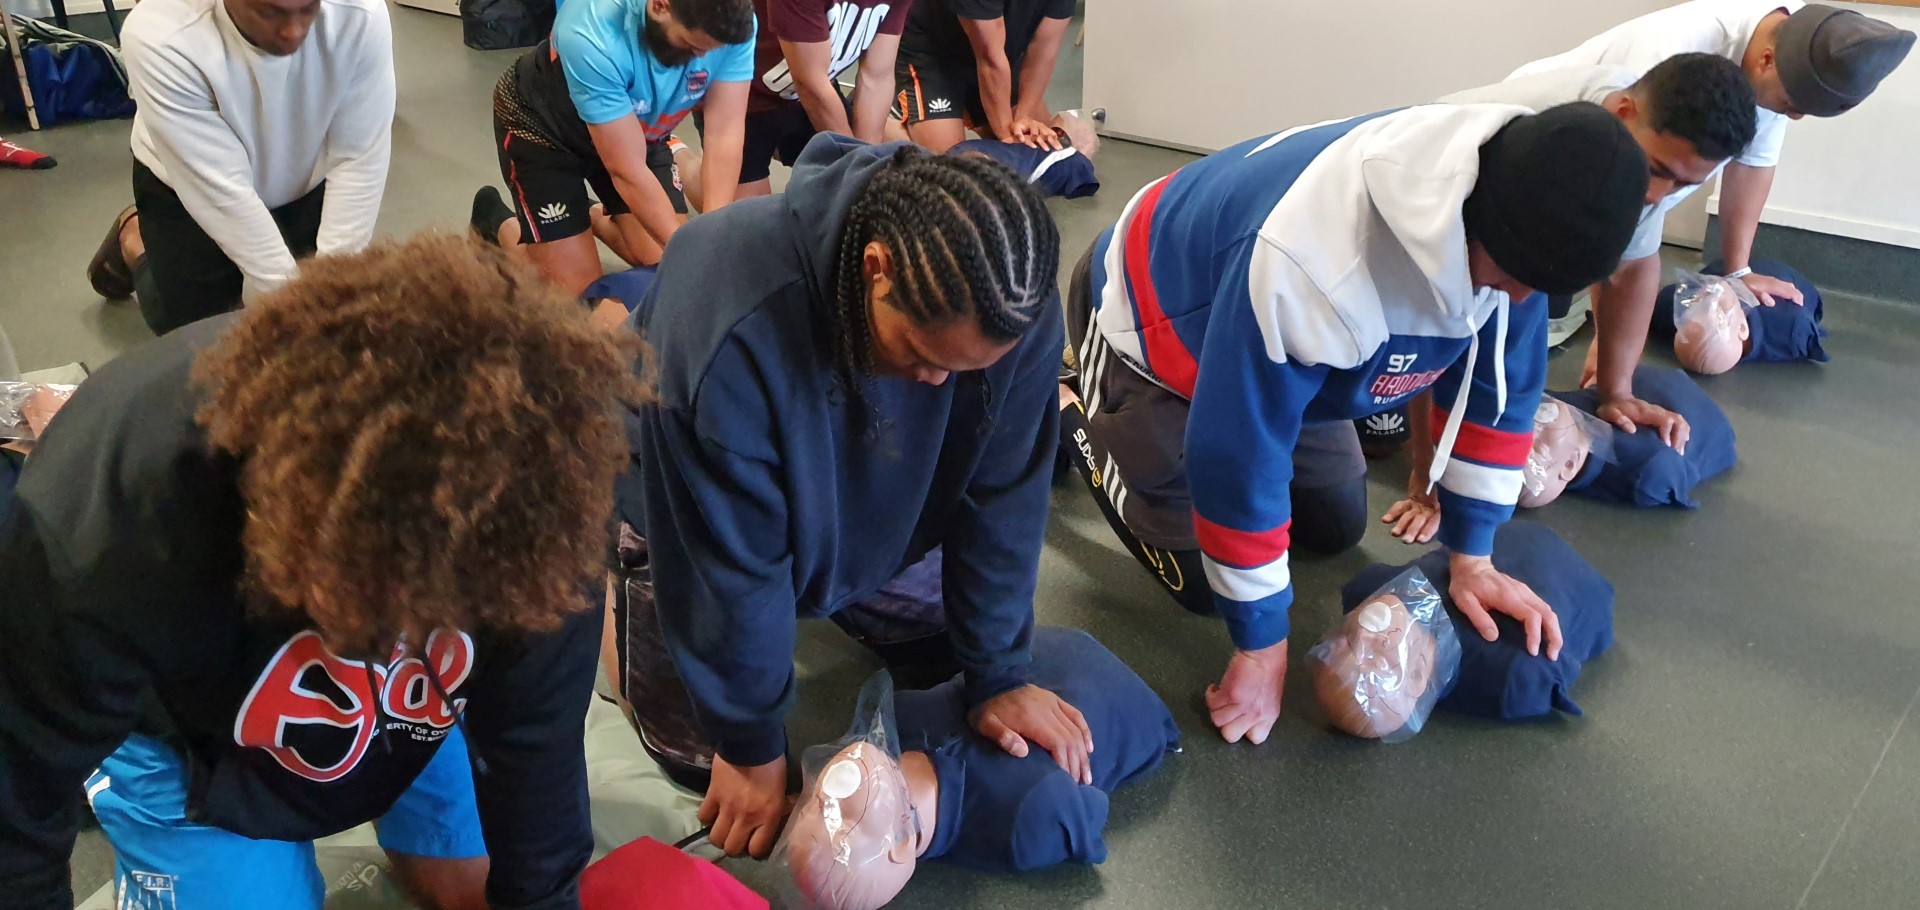 CPR cropped20190729_145944 (Large).jpg